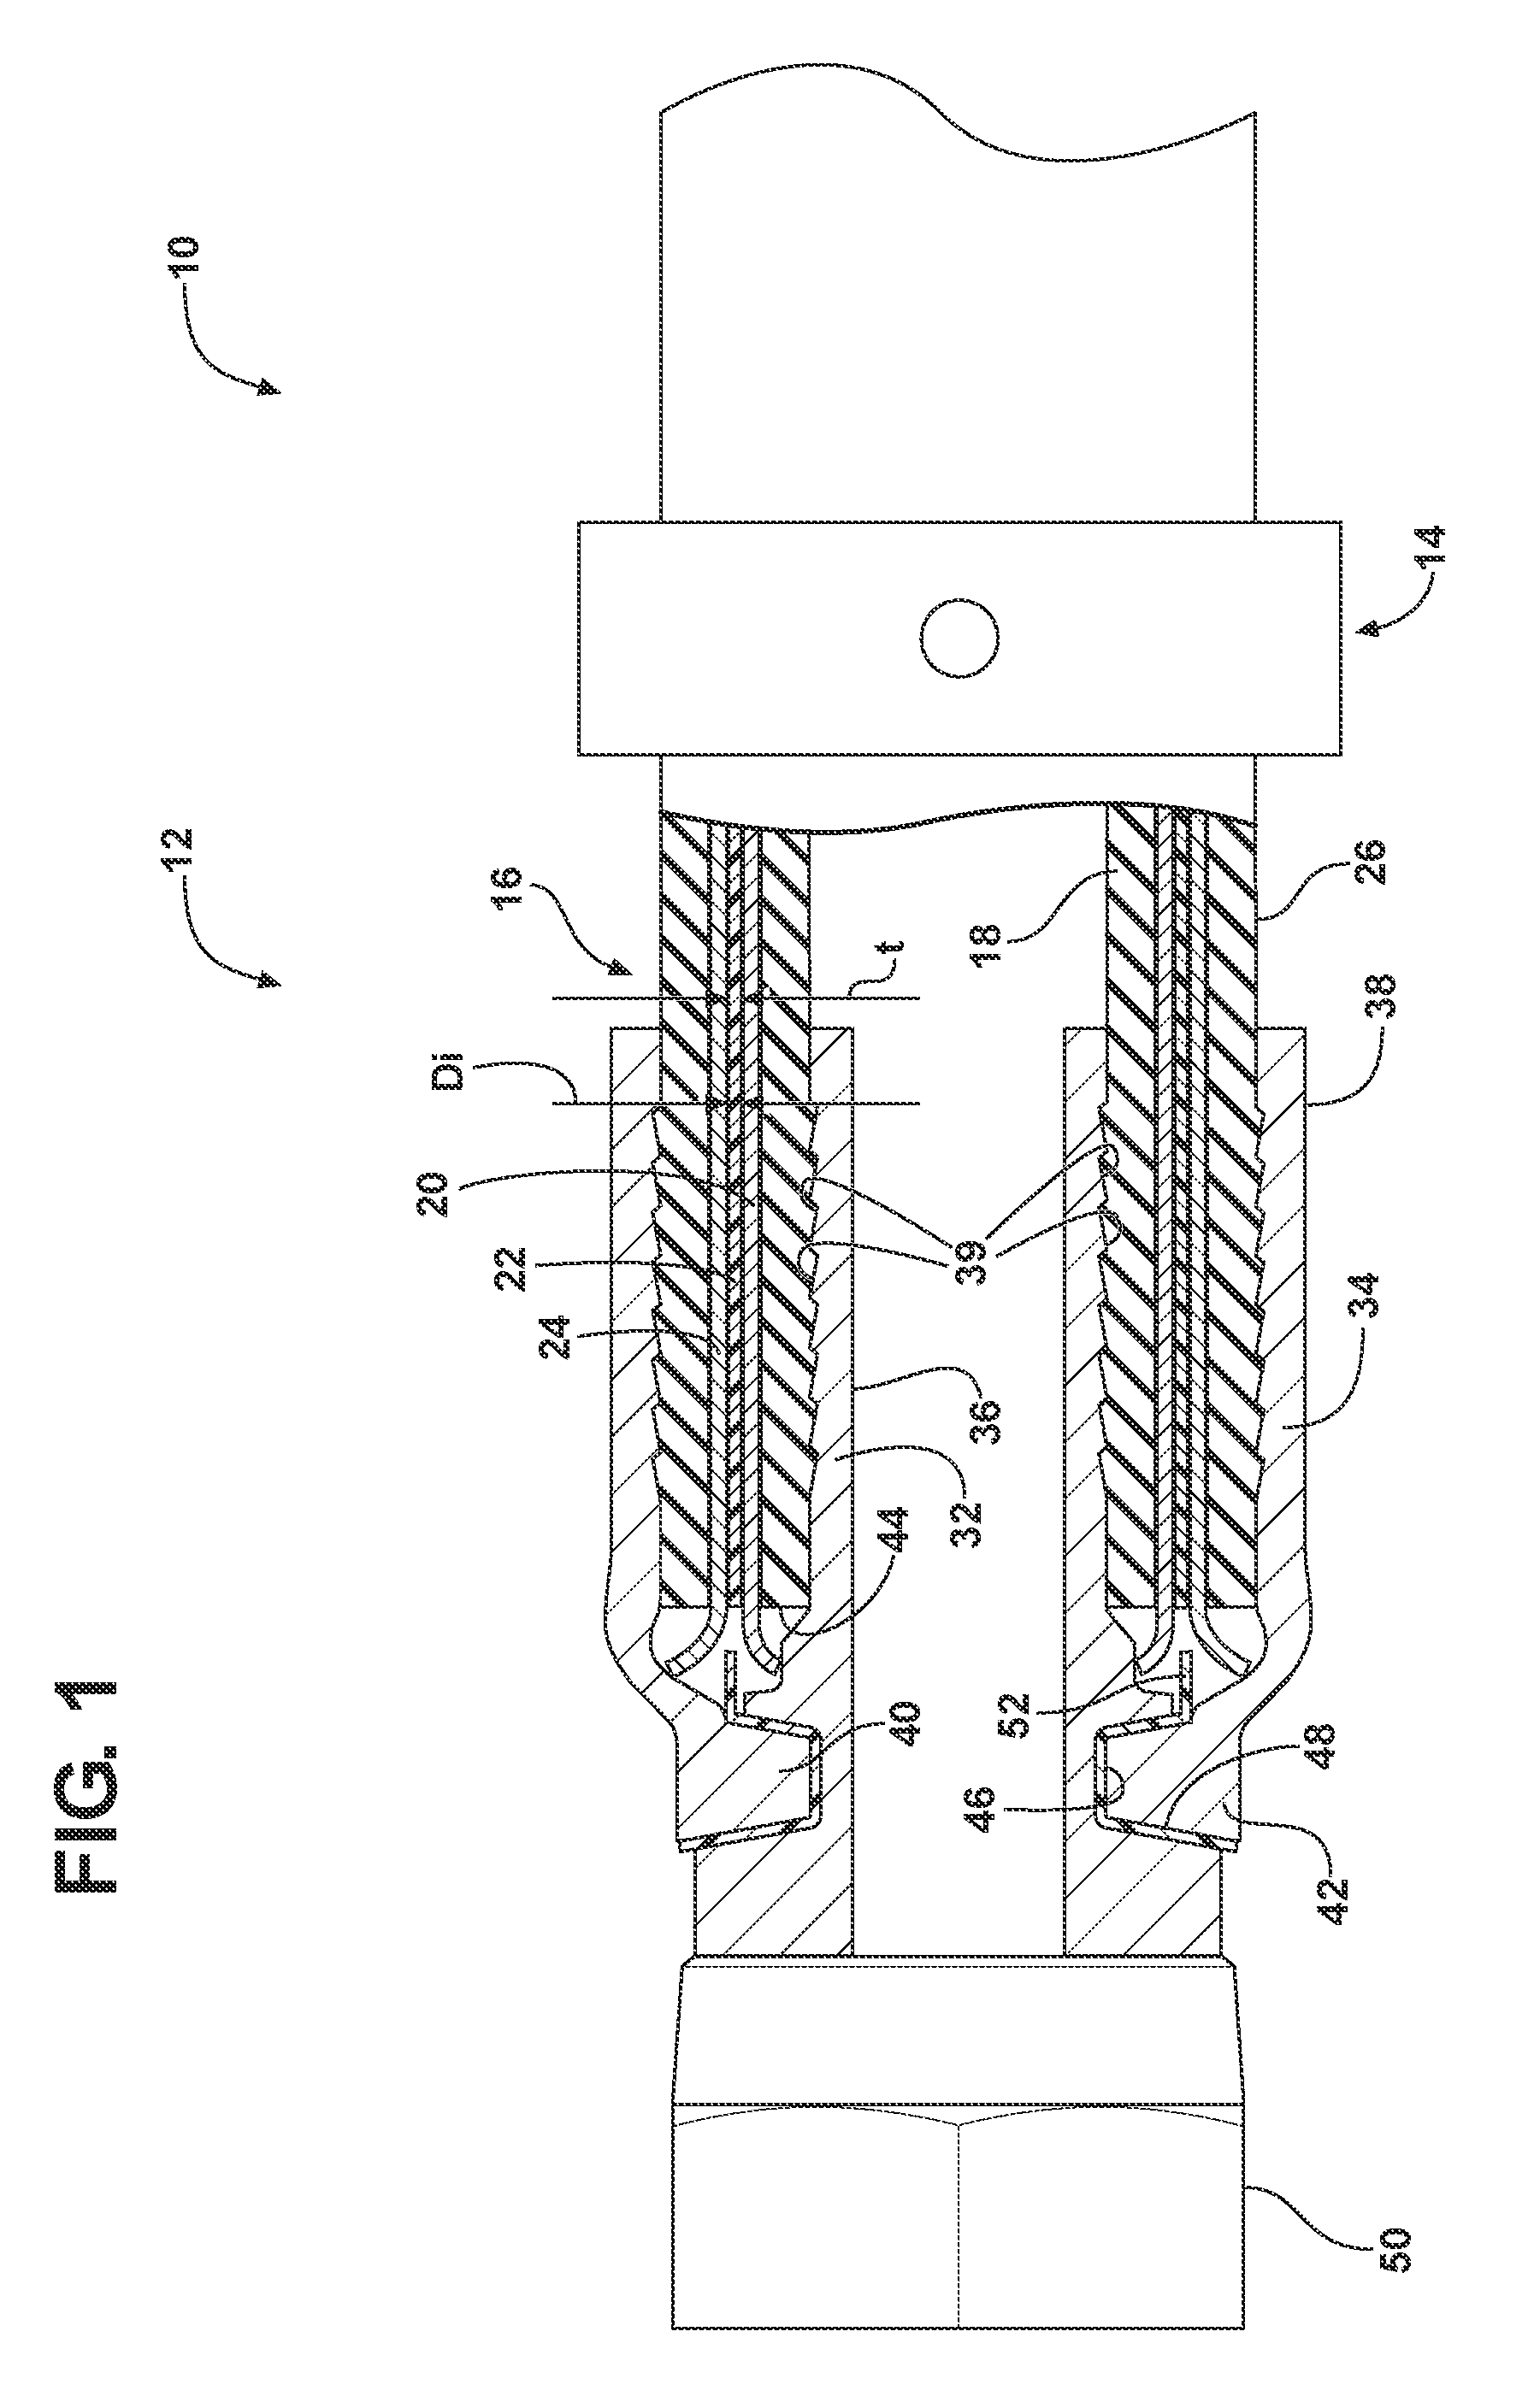 Degradation detection system for a hose assembly